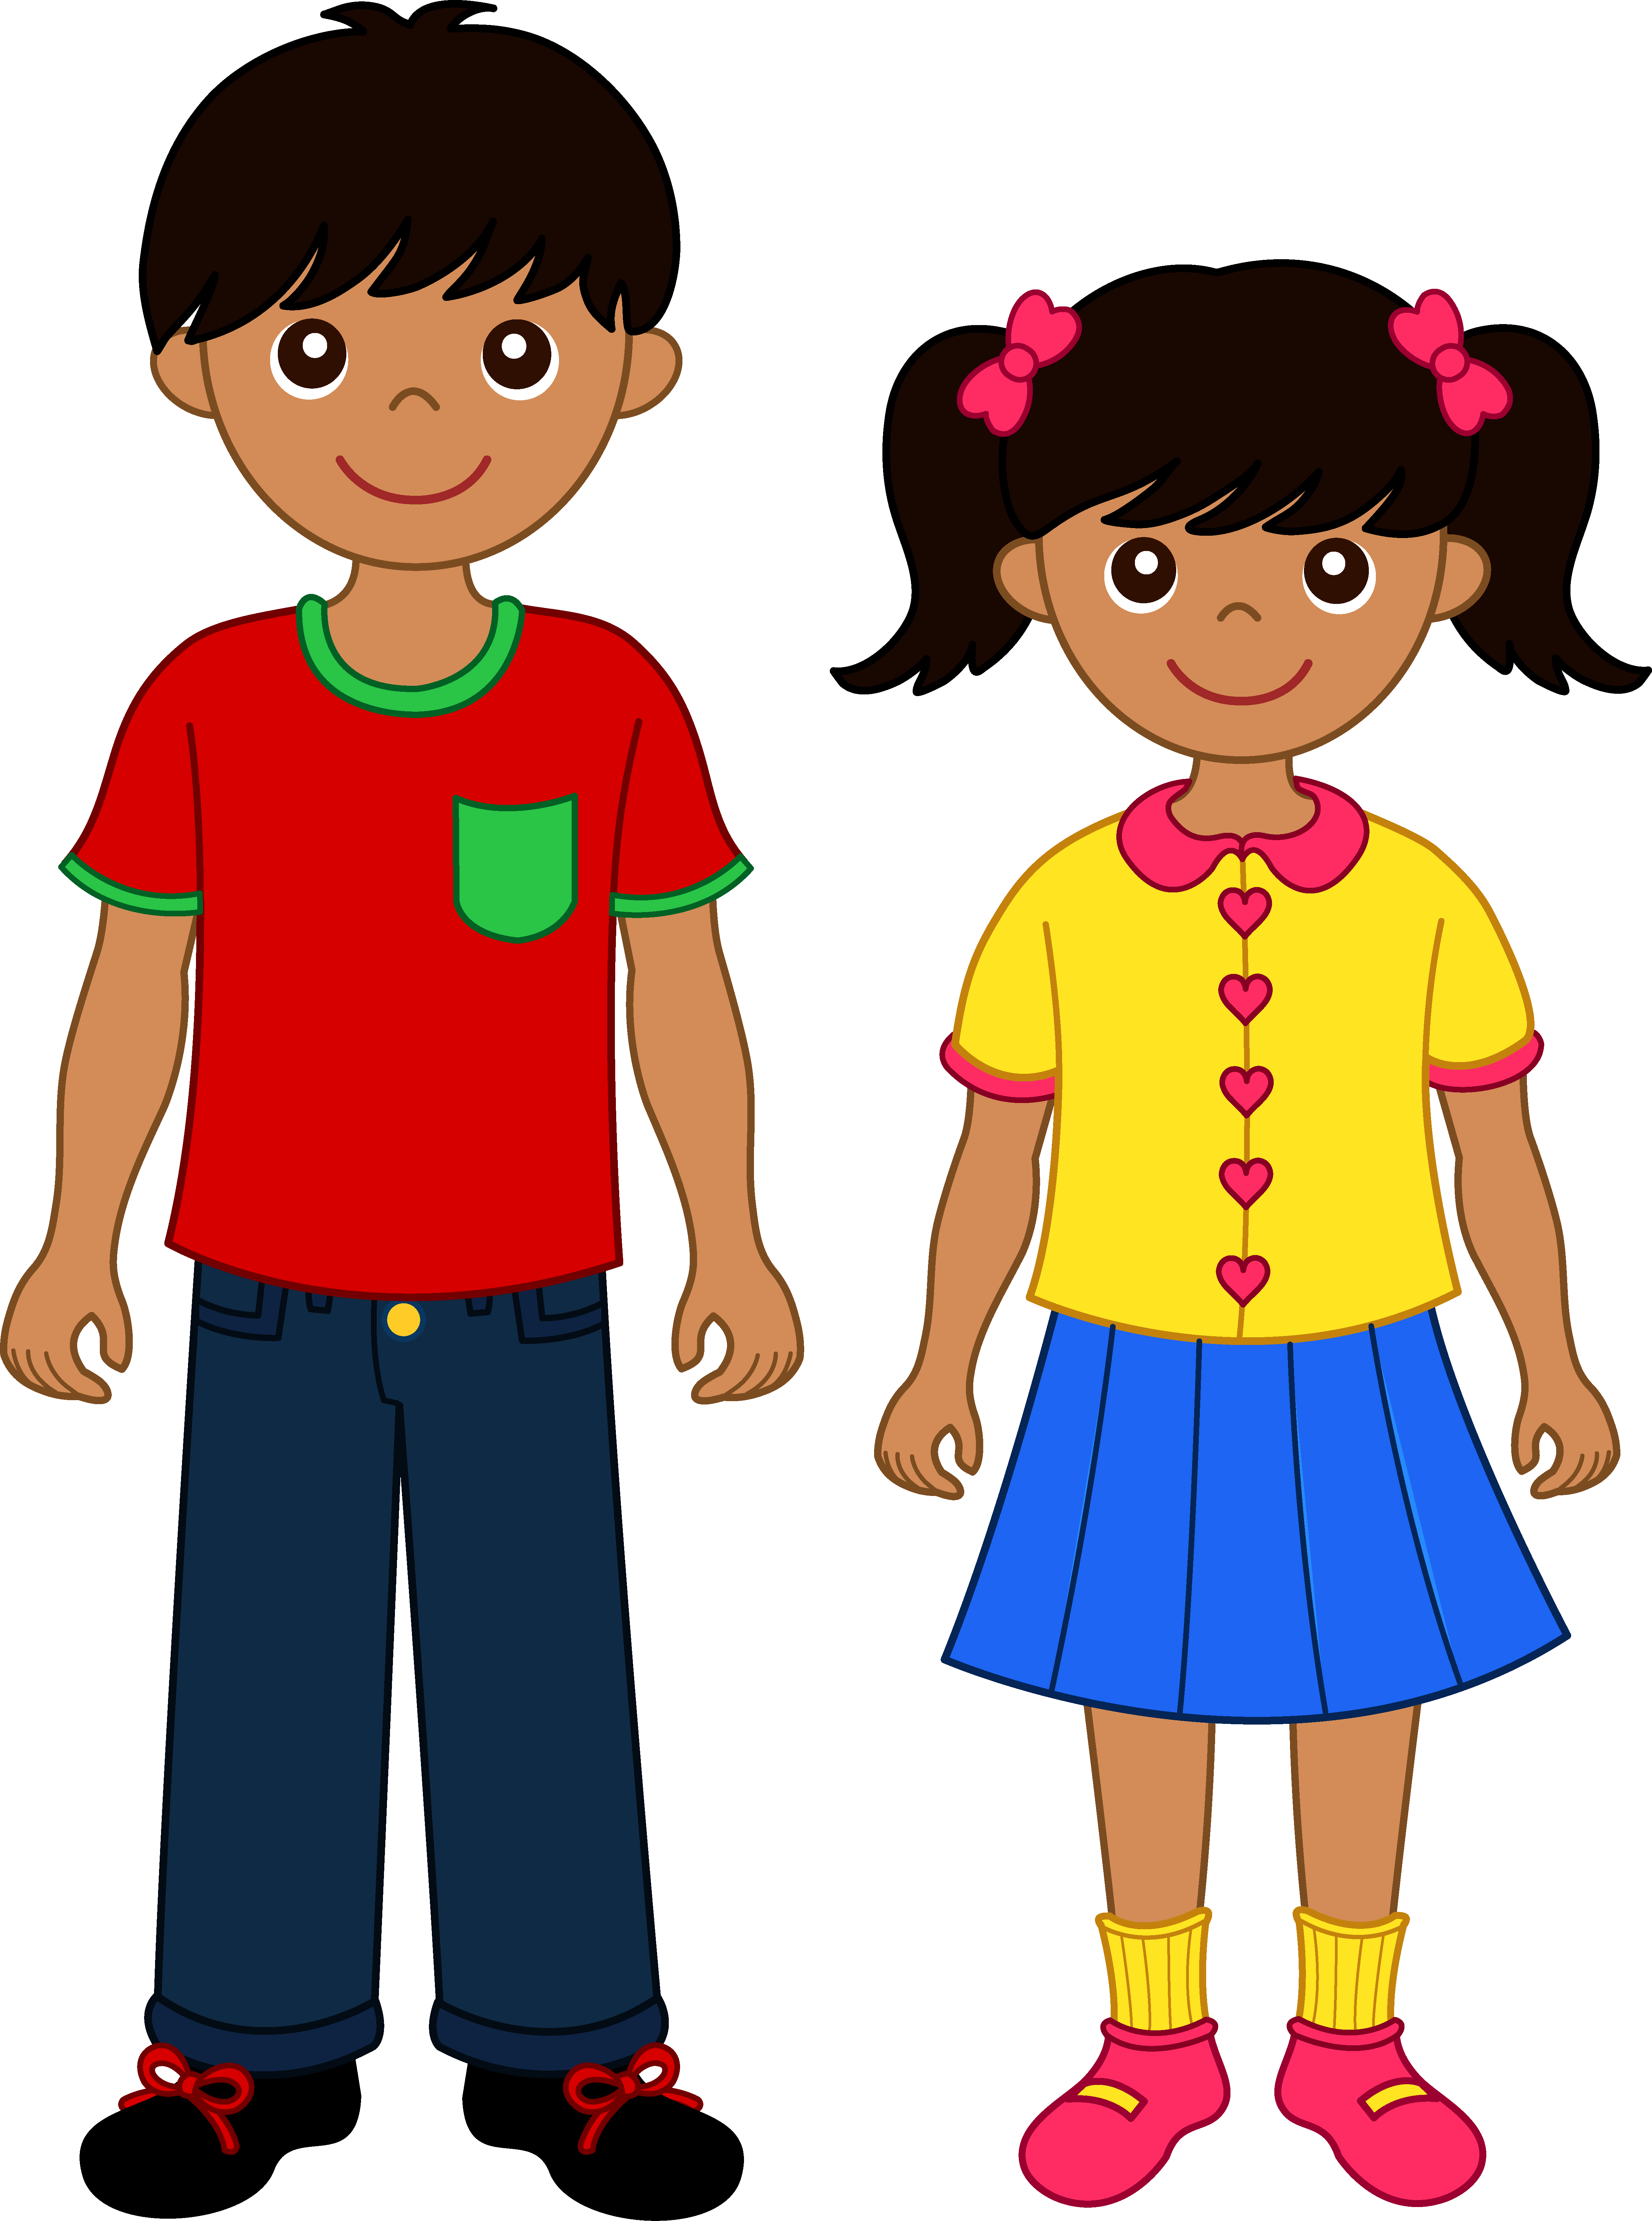 Top kids clip art photo and c